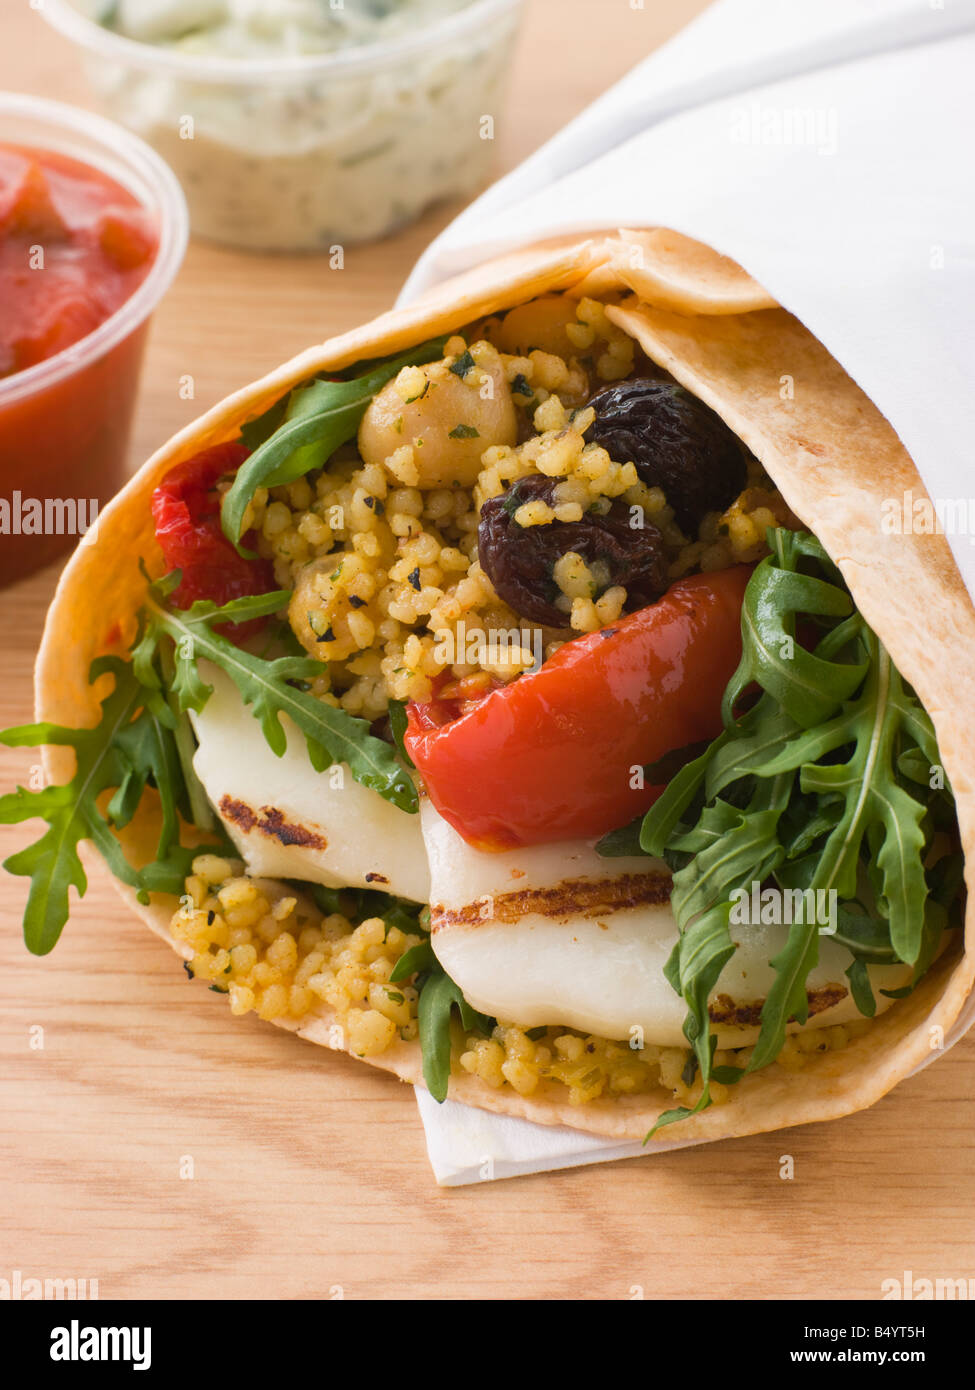 Spiced Cous Cous And Grilled Halloumi Tortilla Wrap Stock Photo